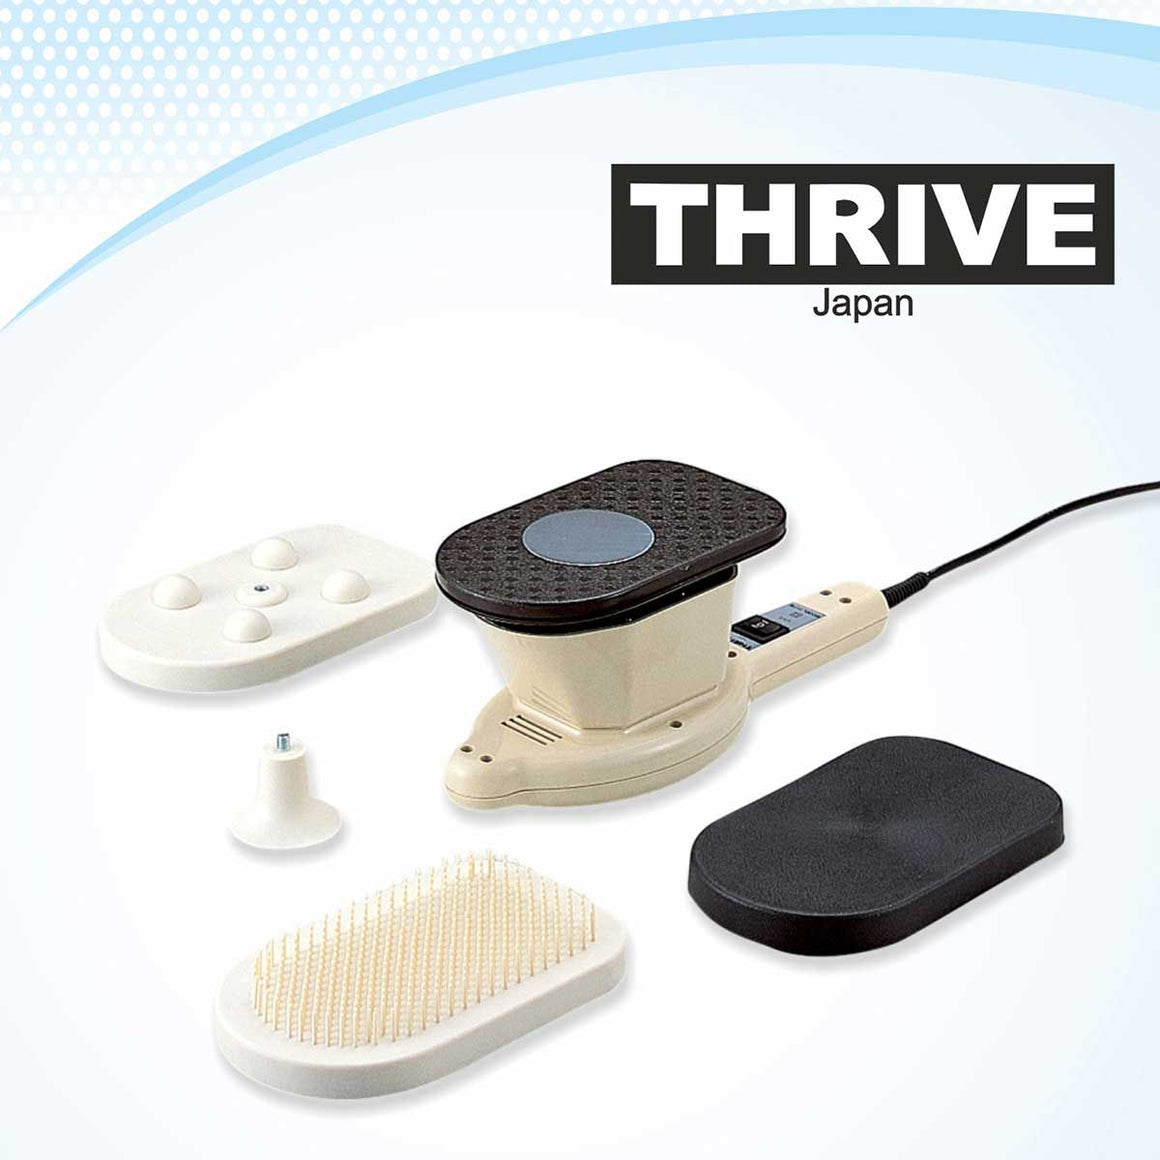 Thrive 717 Massager G5 Massager Made In Japan Original Used In Physi A2z Solution Forever